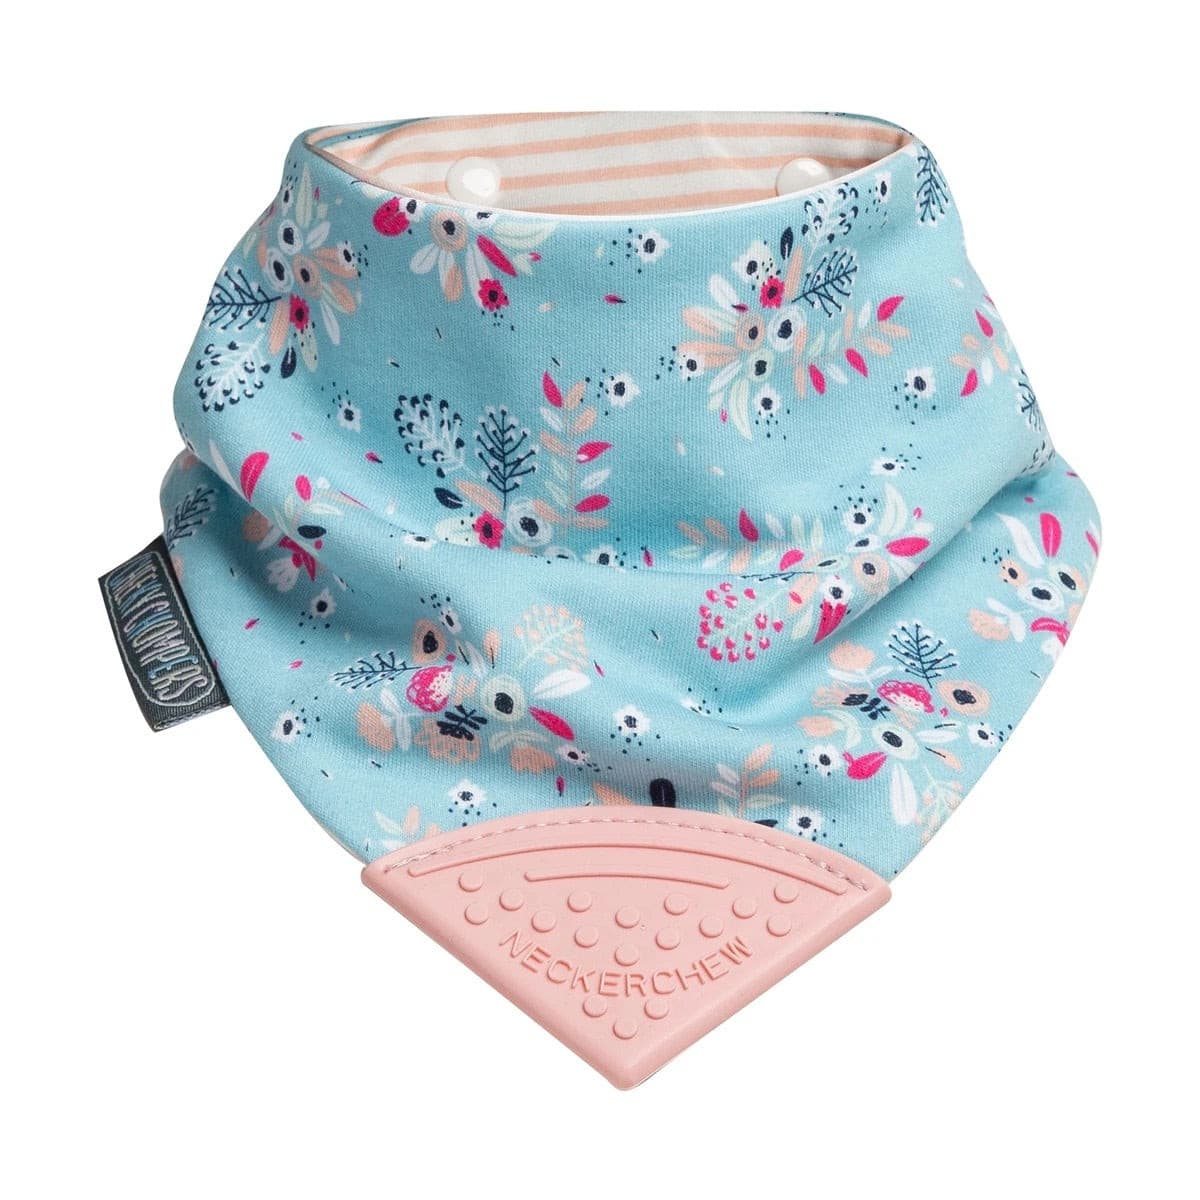 Cheeky Chompers Dribble Bandana Bibs with Teether Attached with teether Super absorbent - 3 layers Hygienic  2 bibs in one Plain layers: 100% cotton Suitable for 2 months - 2 years Flowers